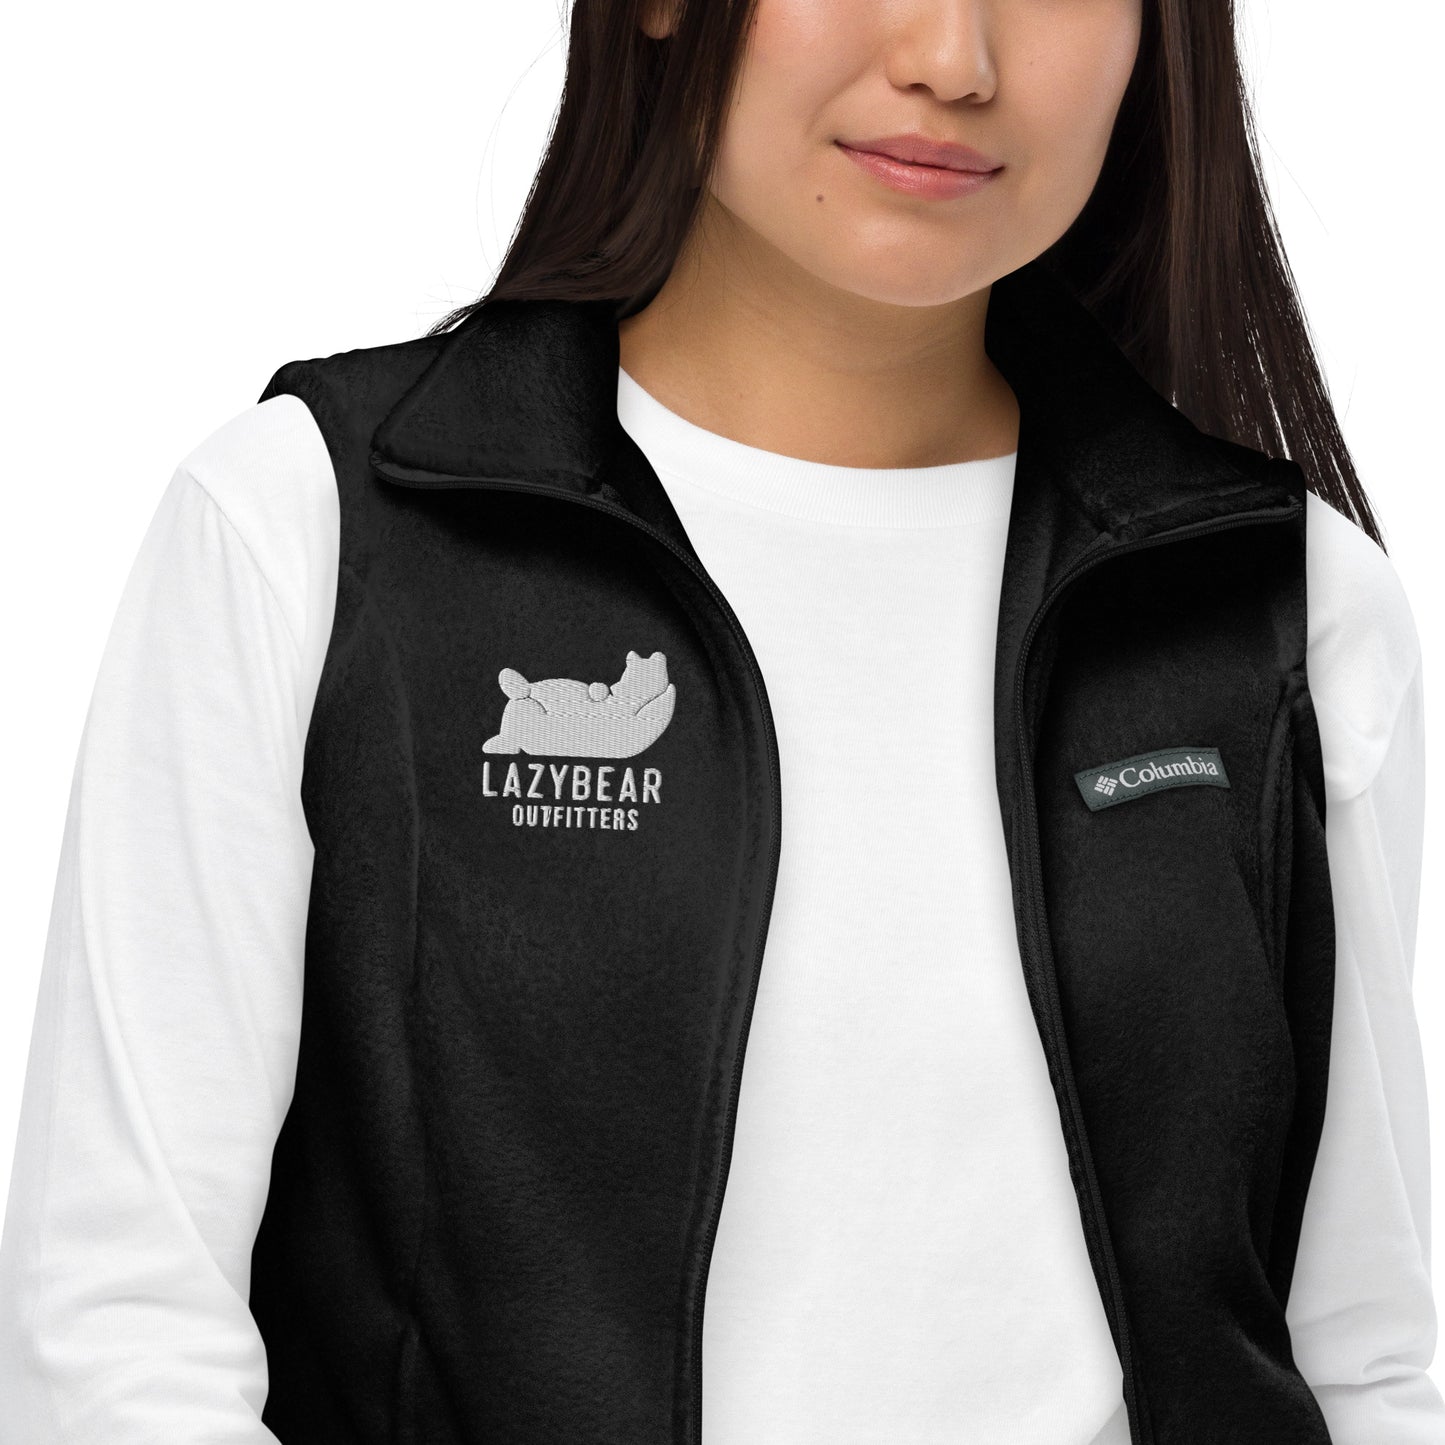 Women’s Lazy Bear Outfitters x Columbia Fleece Vest (dark options with white logo)